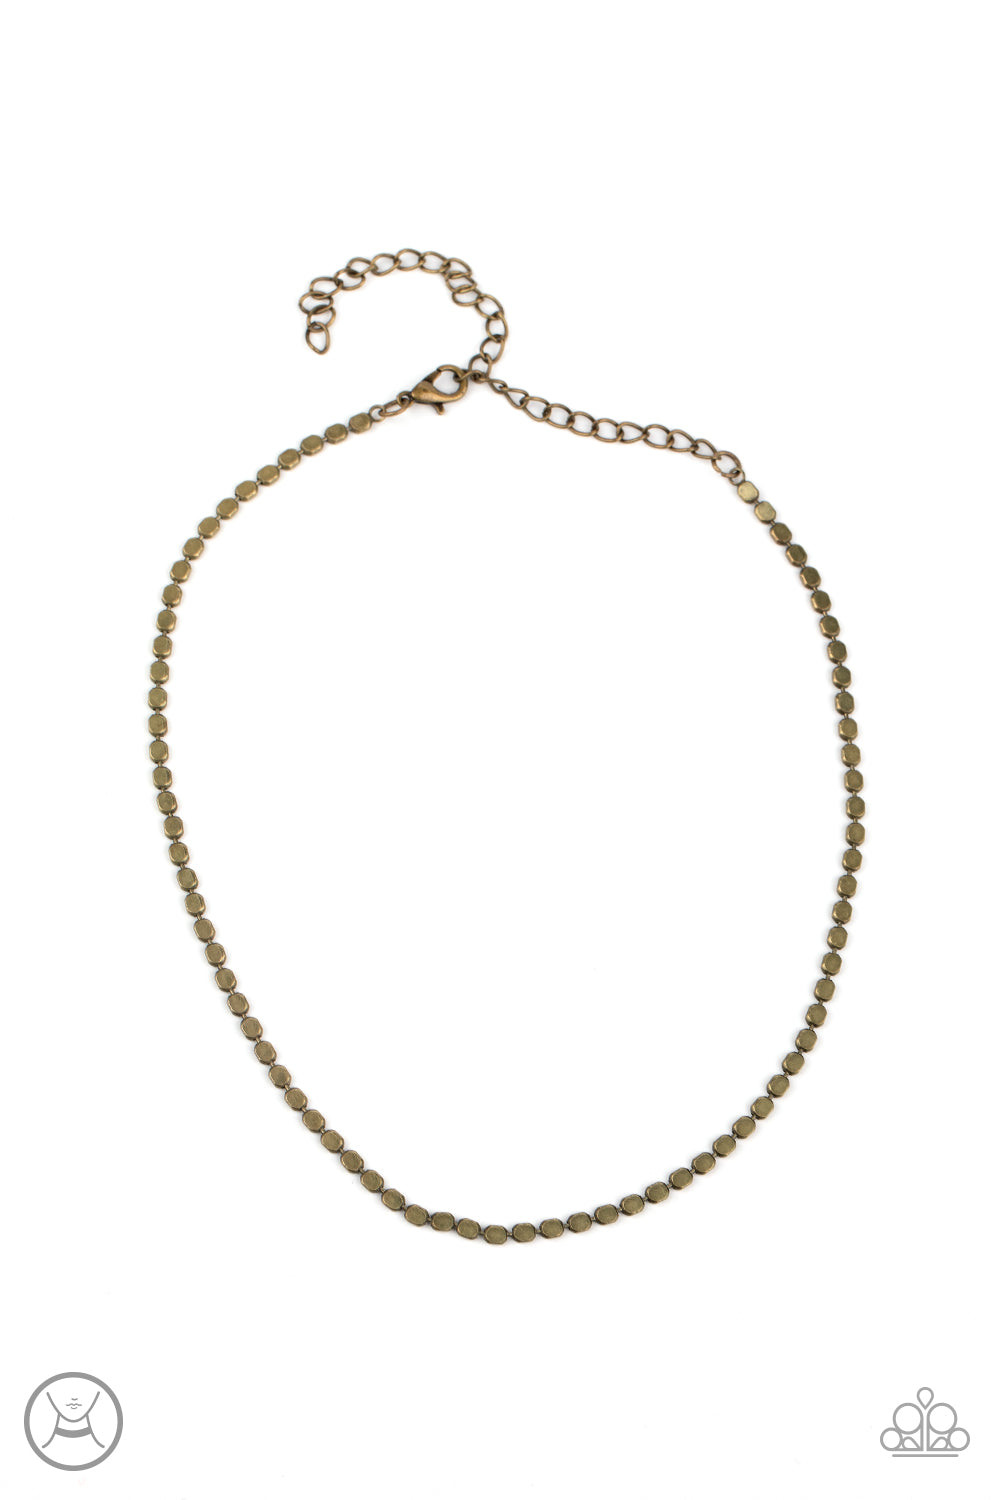 When in CHROME Brass Necklace